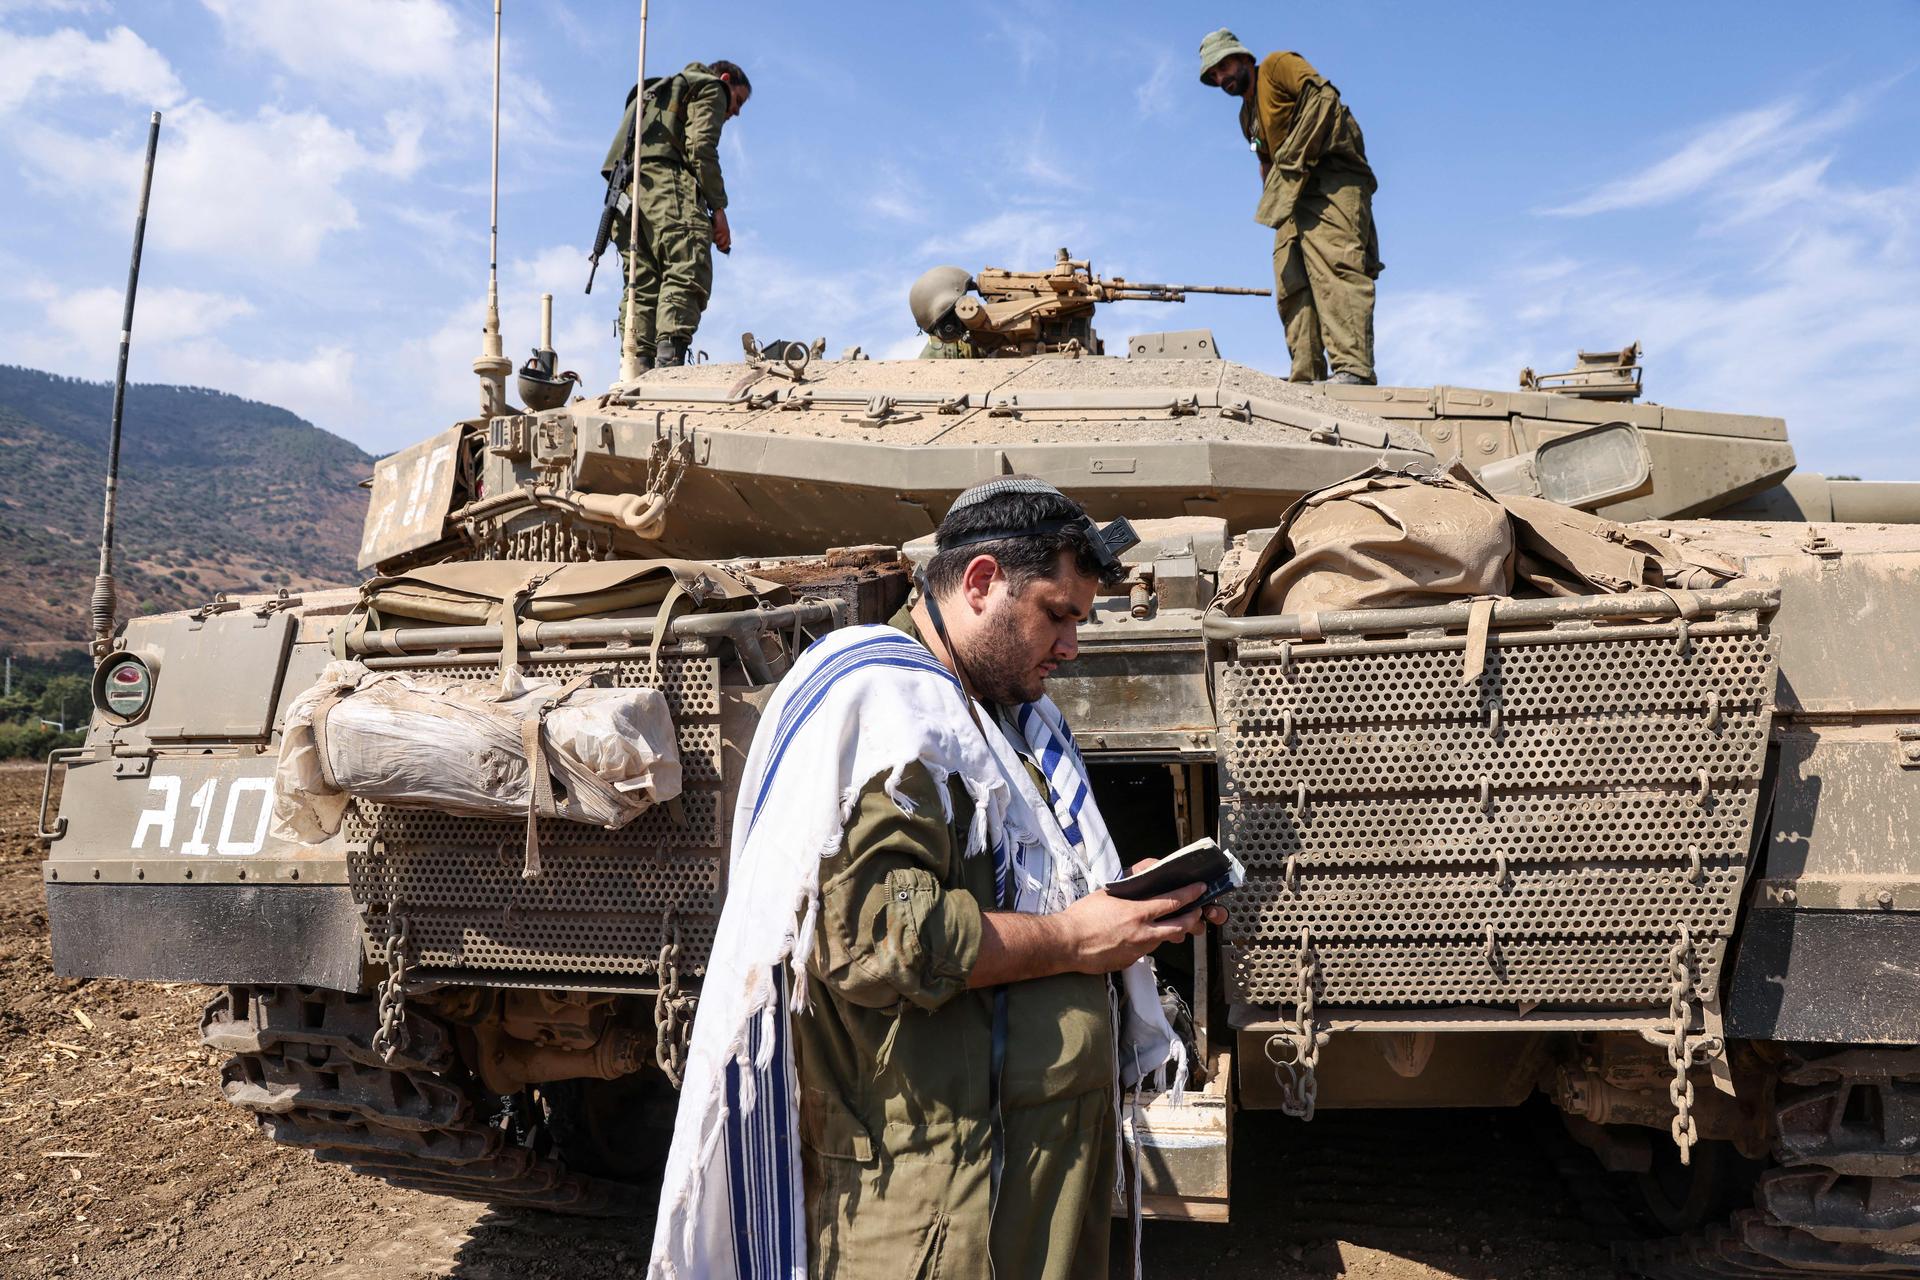 An Israeli solder prays in front of an IDF tank on the outskirts of Kiryat Shmona, a northern town near the border with Lebanon. (JALAA MAREY/AFP via Getty Images)